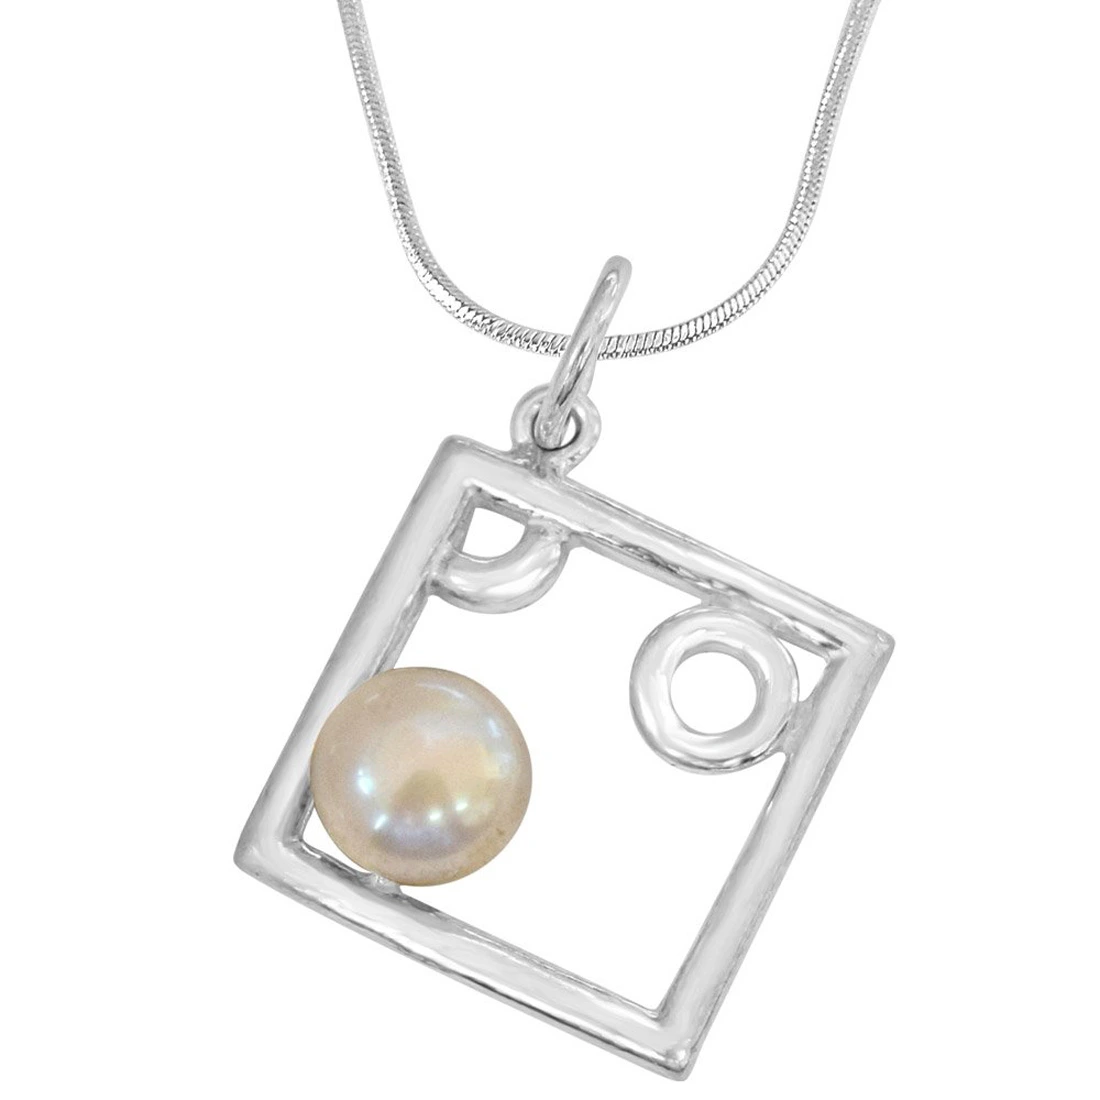 Pearl Delight - Square Shaped Real Pearl and Sterling Silver Pendant with Silver Finished Chain for Girls (SDS79)